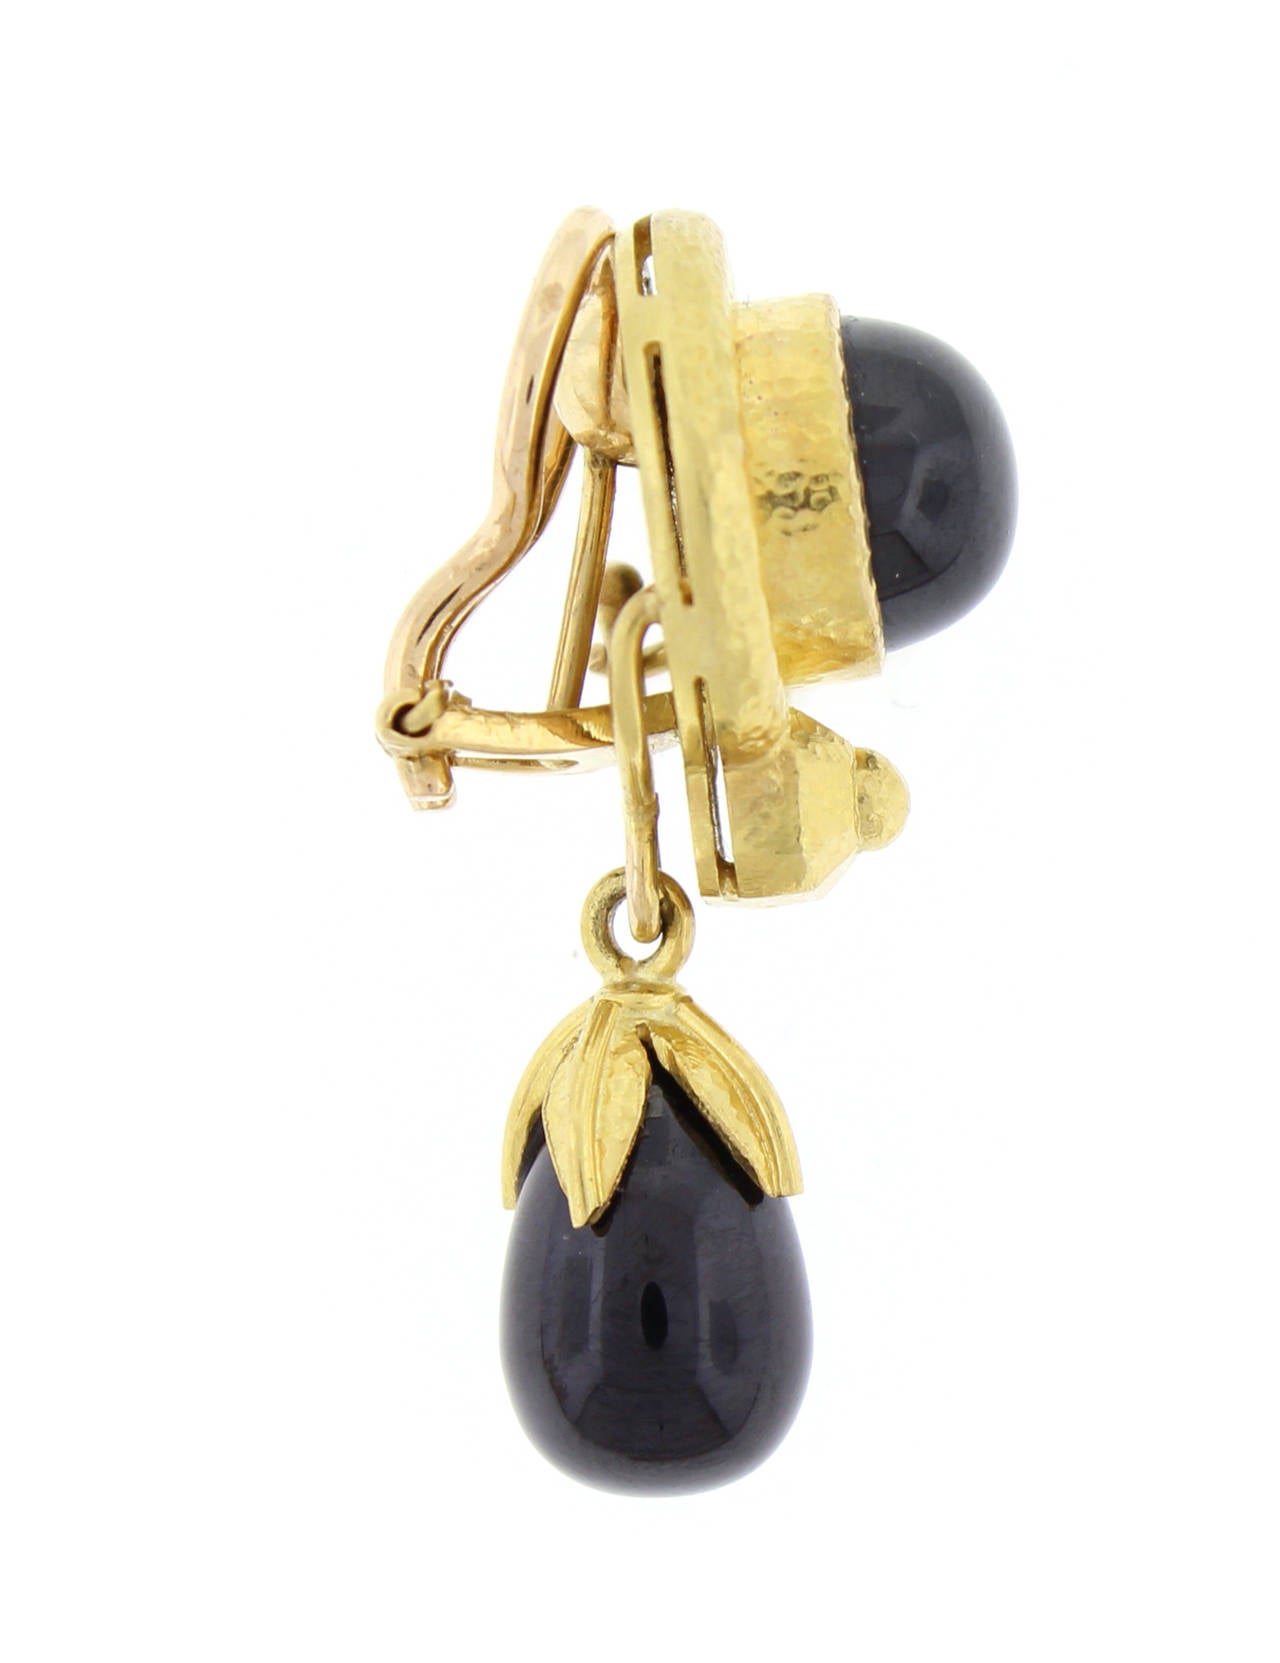 19 karat yellow gold  Elizabeth Locke  black spinel drop earring. The bottom drops spinels are detachable. The post fold back and can be worn as both clips or for pierced ears.